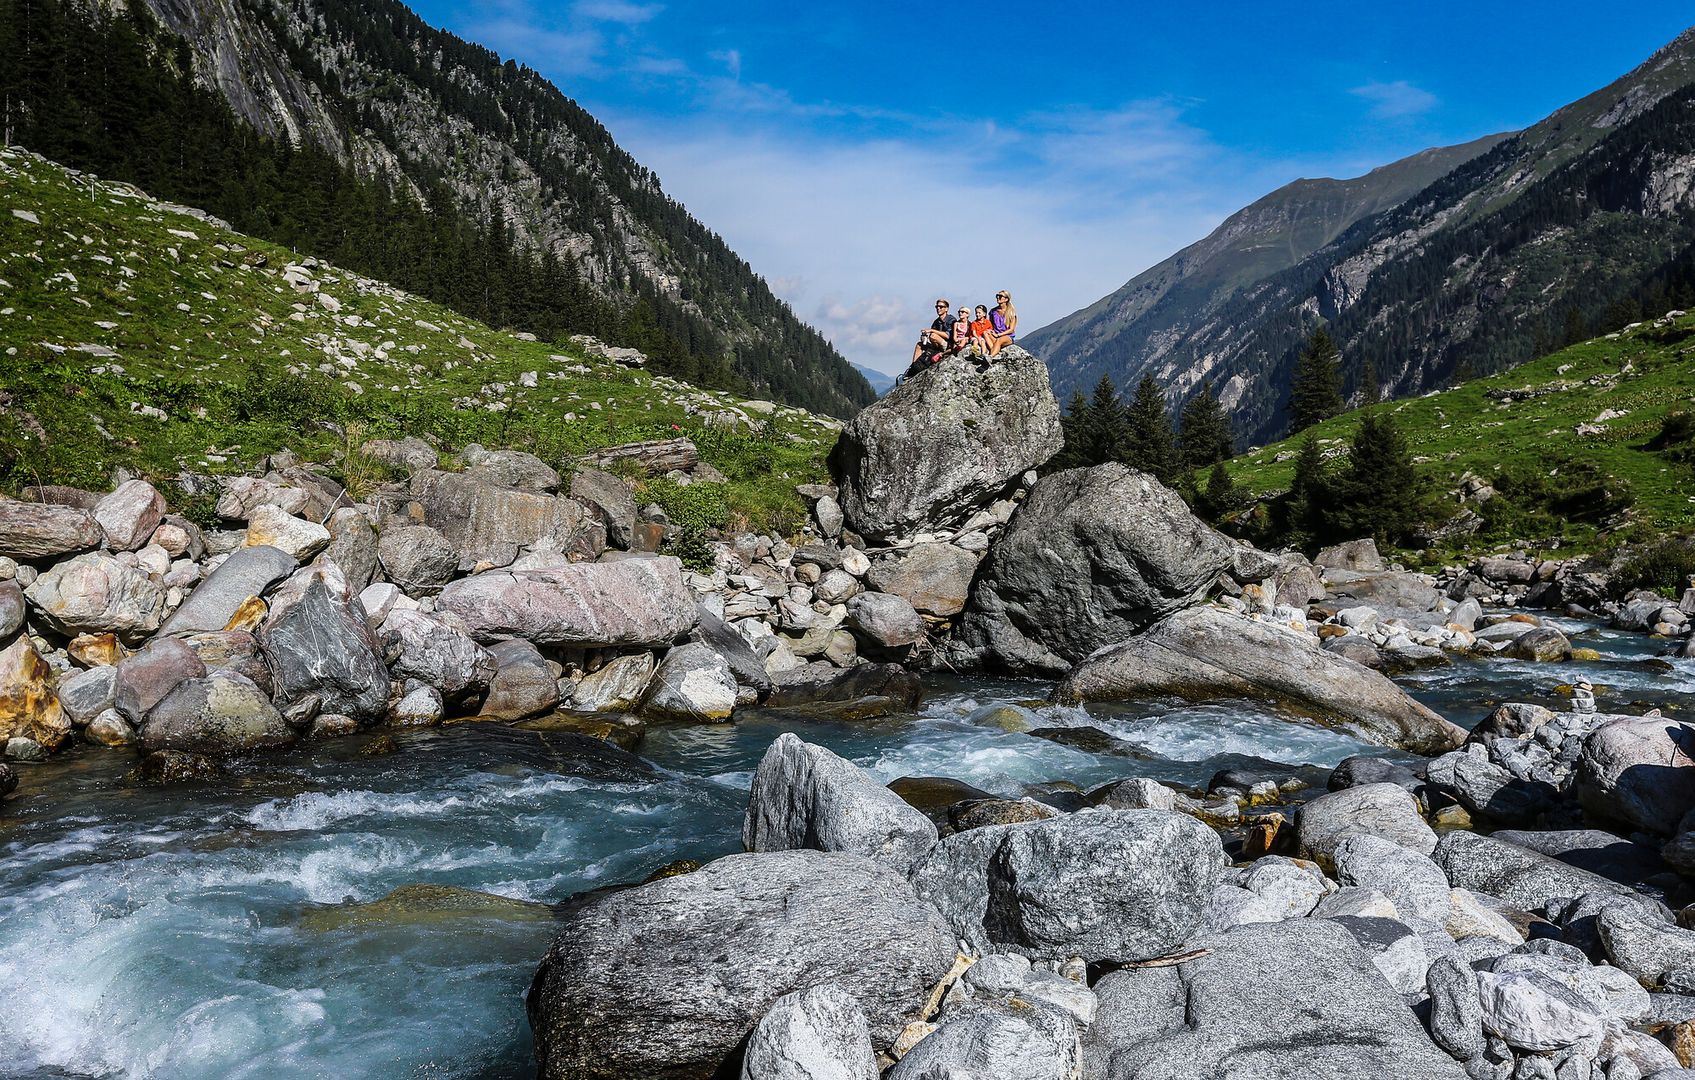 The family enjoys the mountain view in the Stilluptal Valley.